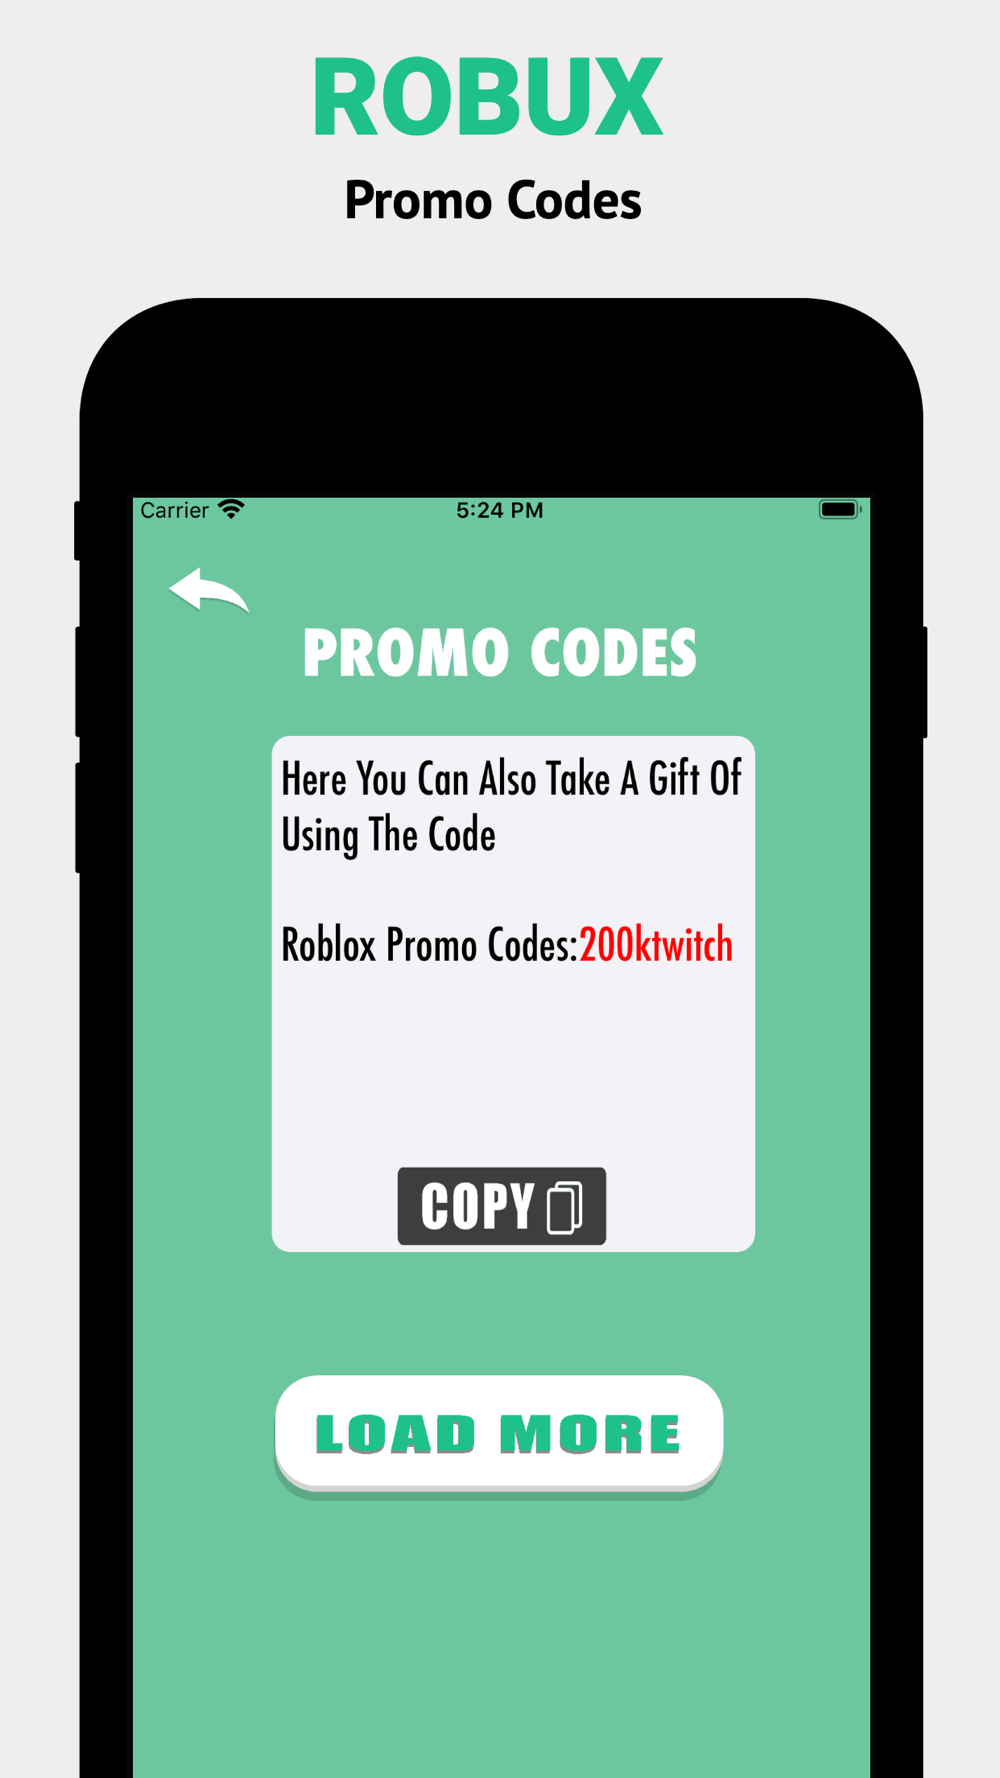 Robux Promo Codes For Roblox Free Download App For Iphone Steprimo Com - robux gift codes